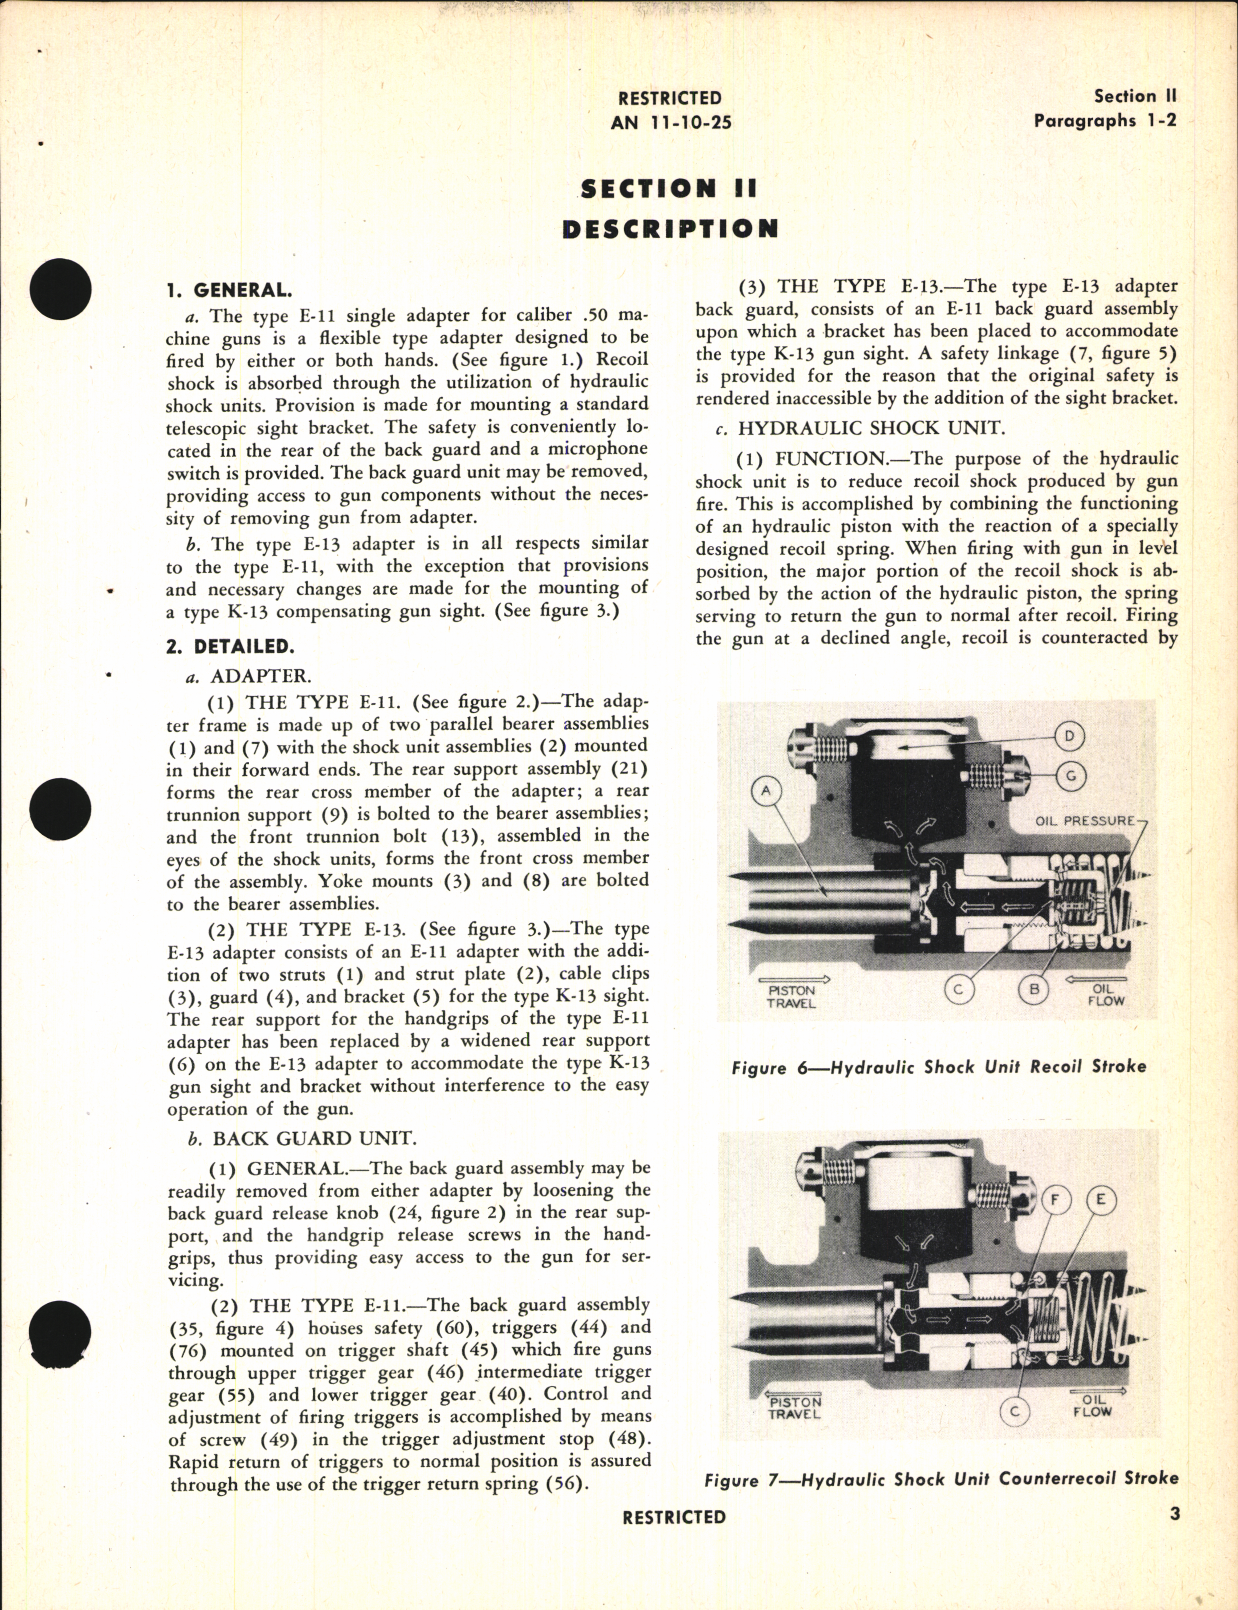 Sample page 7 from AirCorps Library document: Handbook of Instructions with Parts Catalog for Single Adapters for Caliber .50 Machine Guns